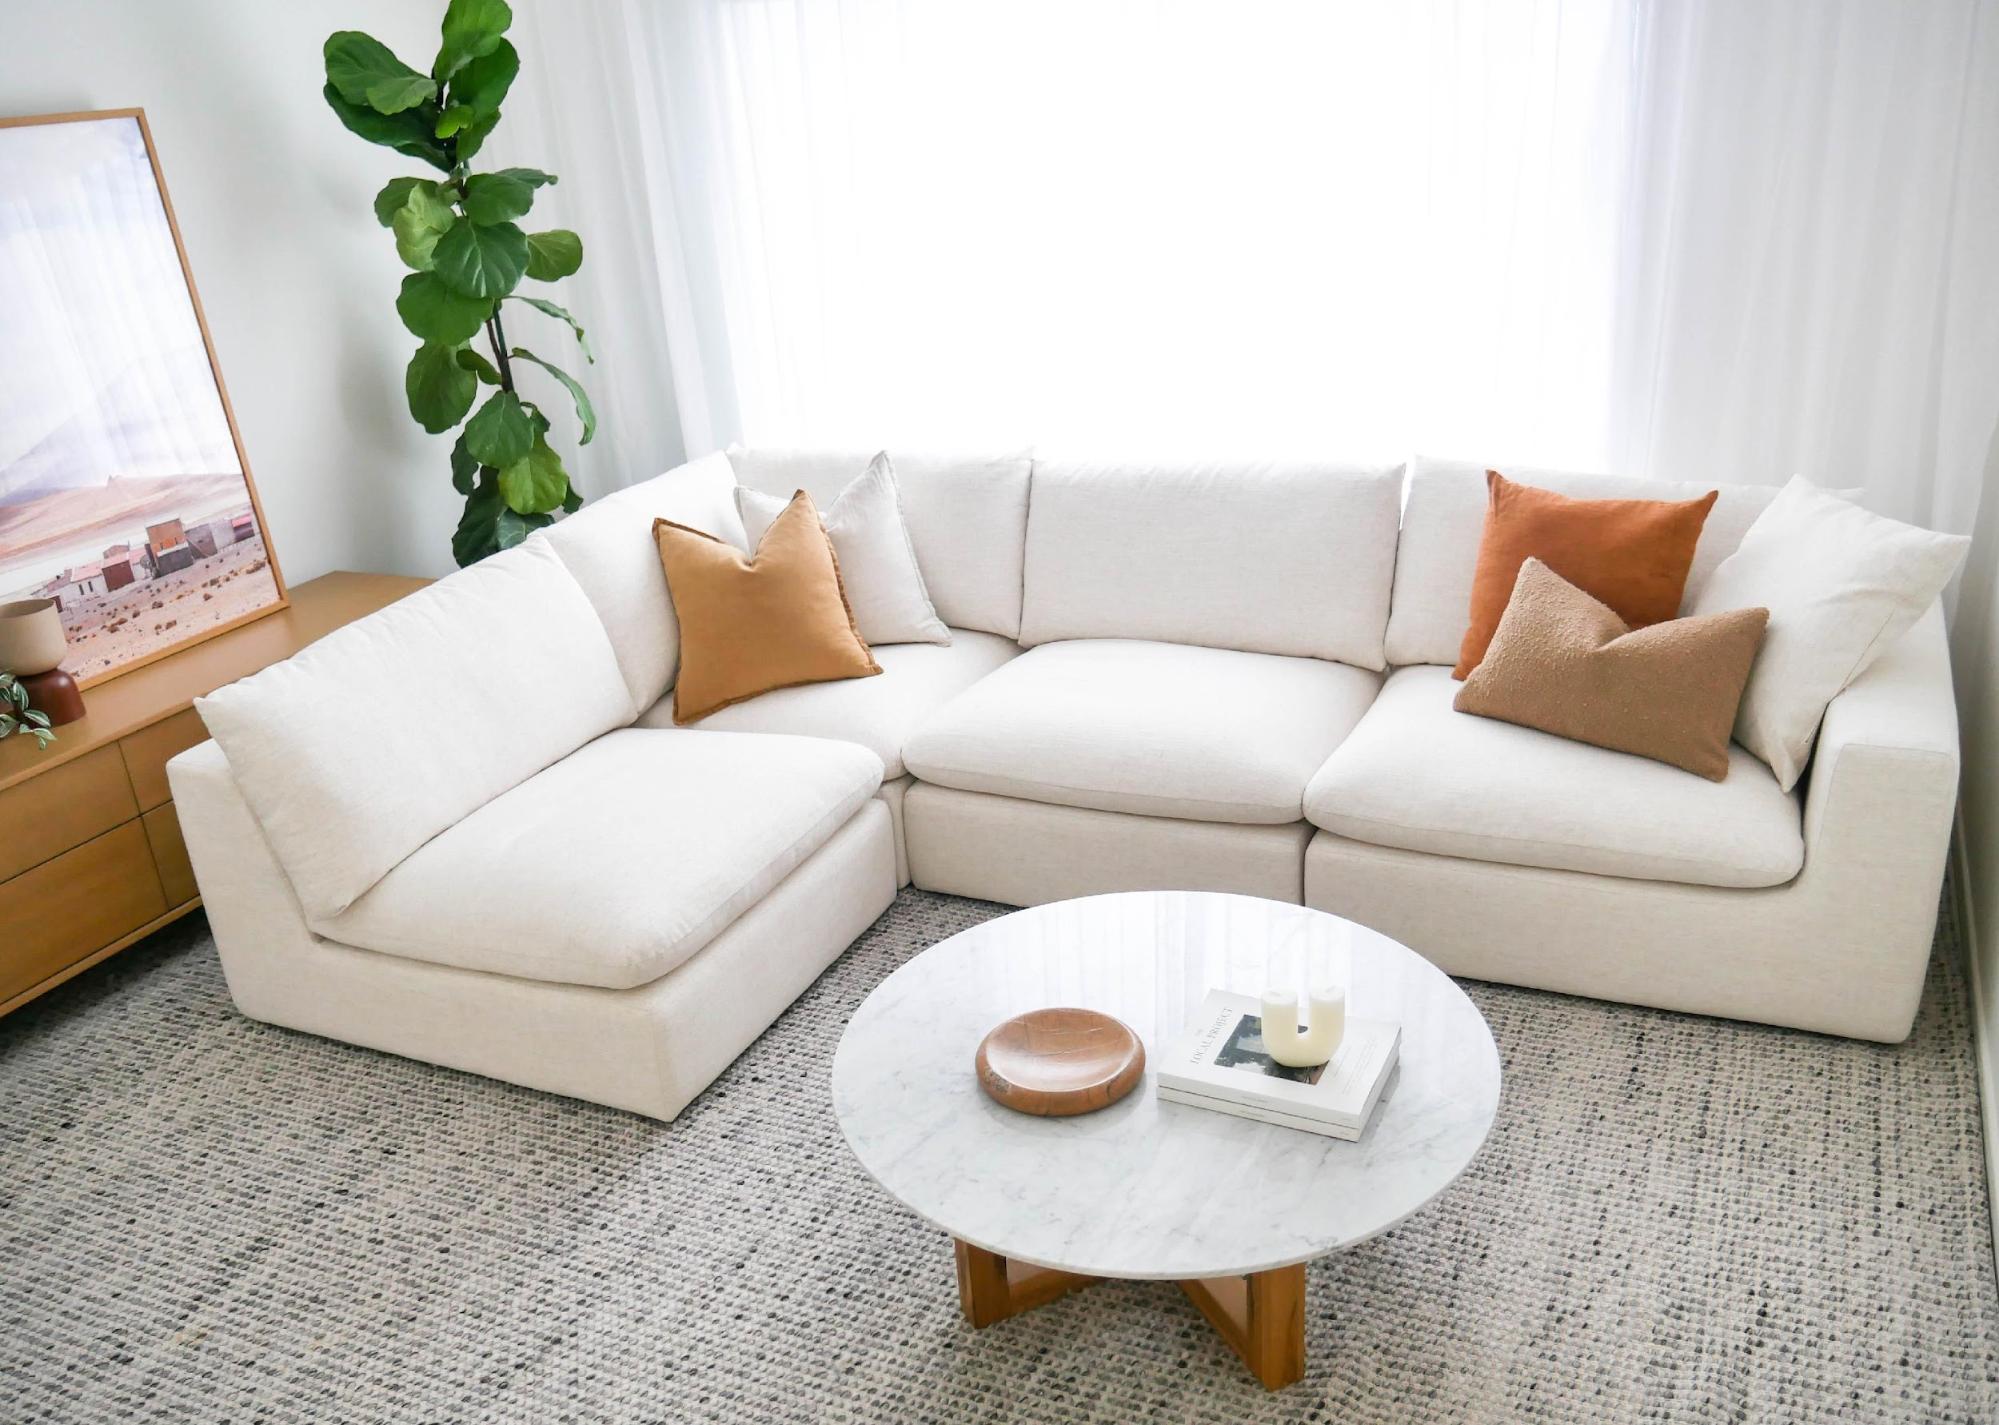 How To Clean Sofa Without Vacuum